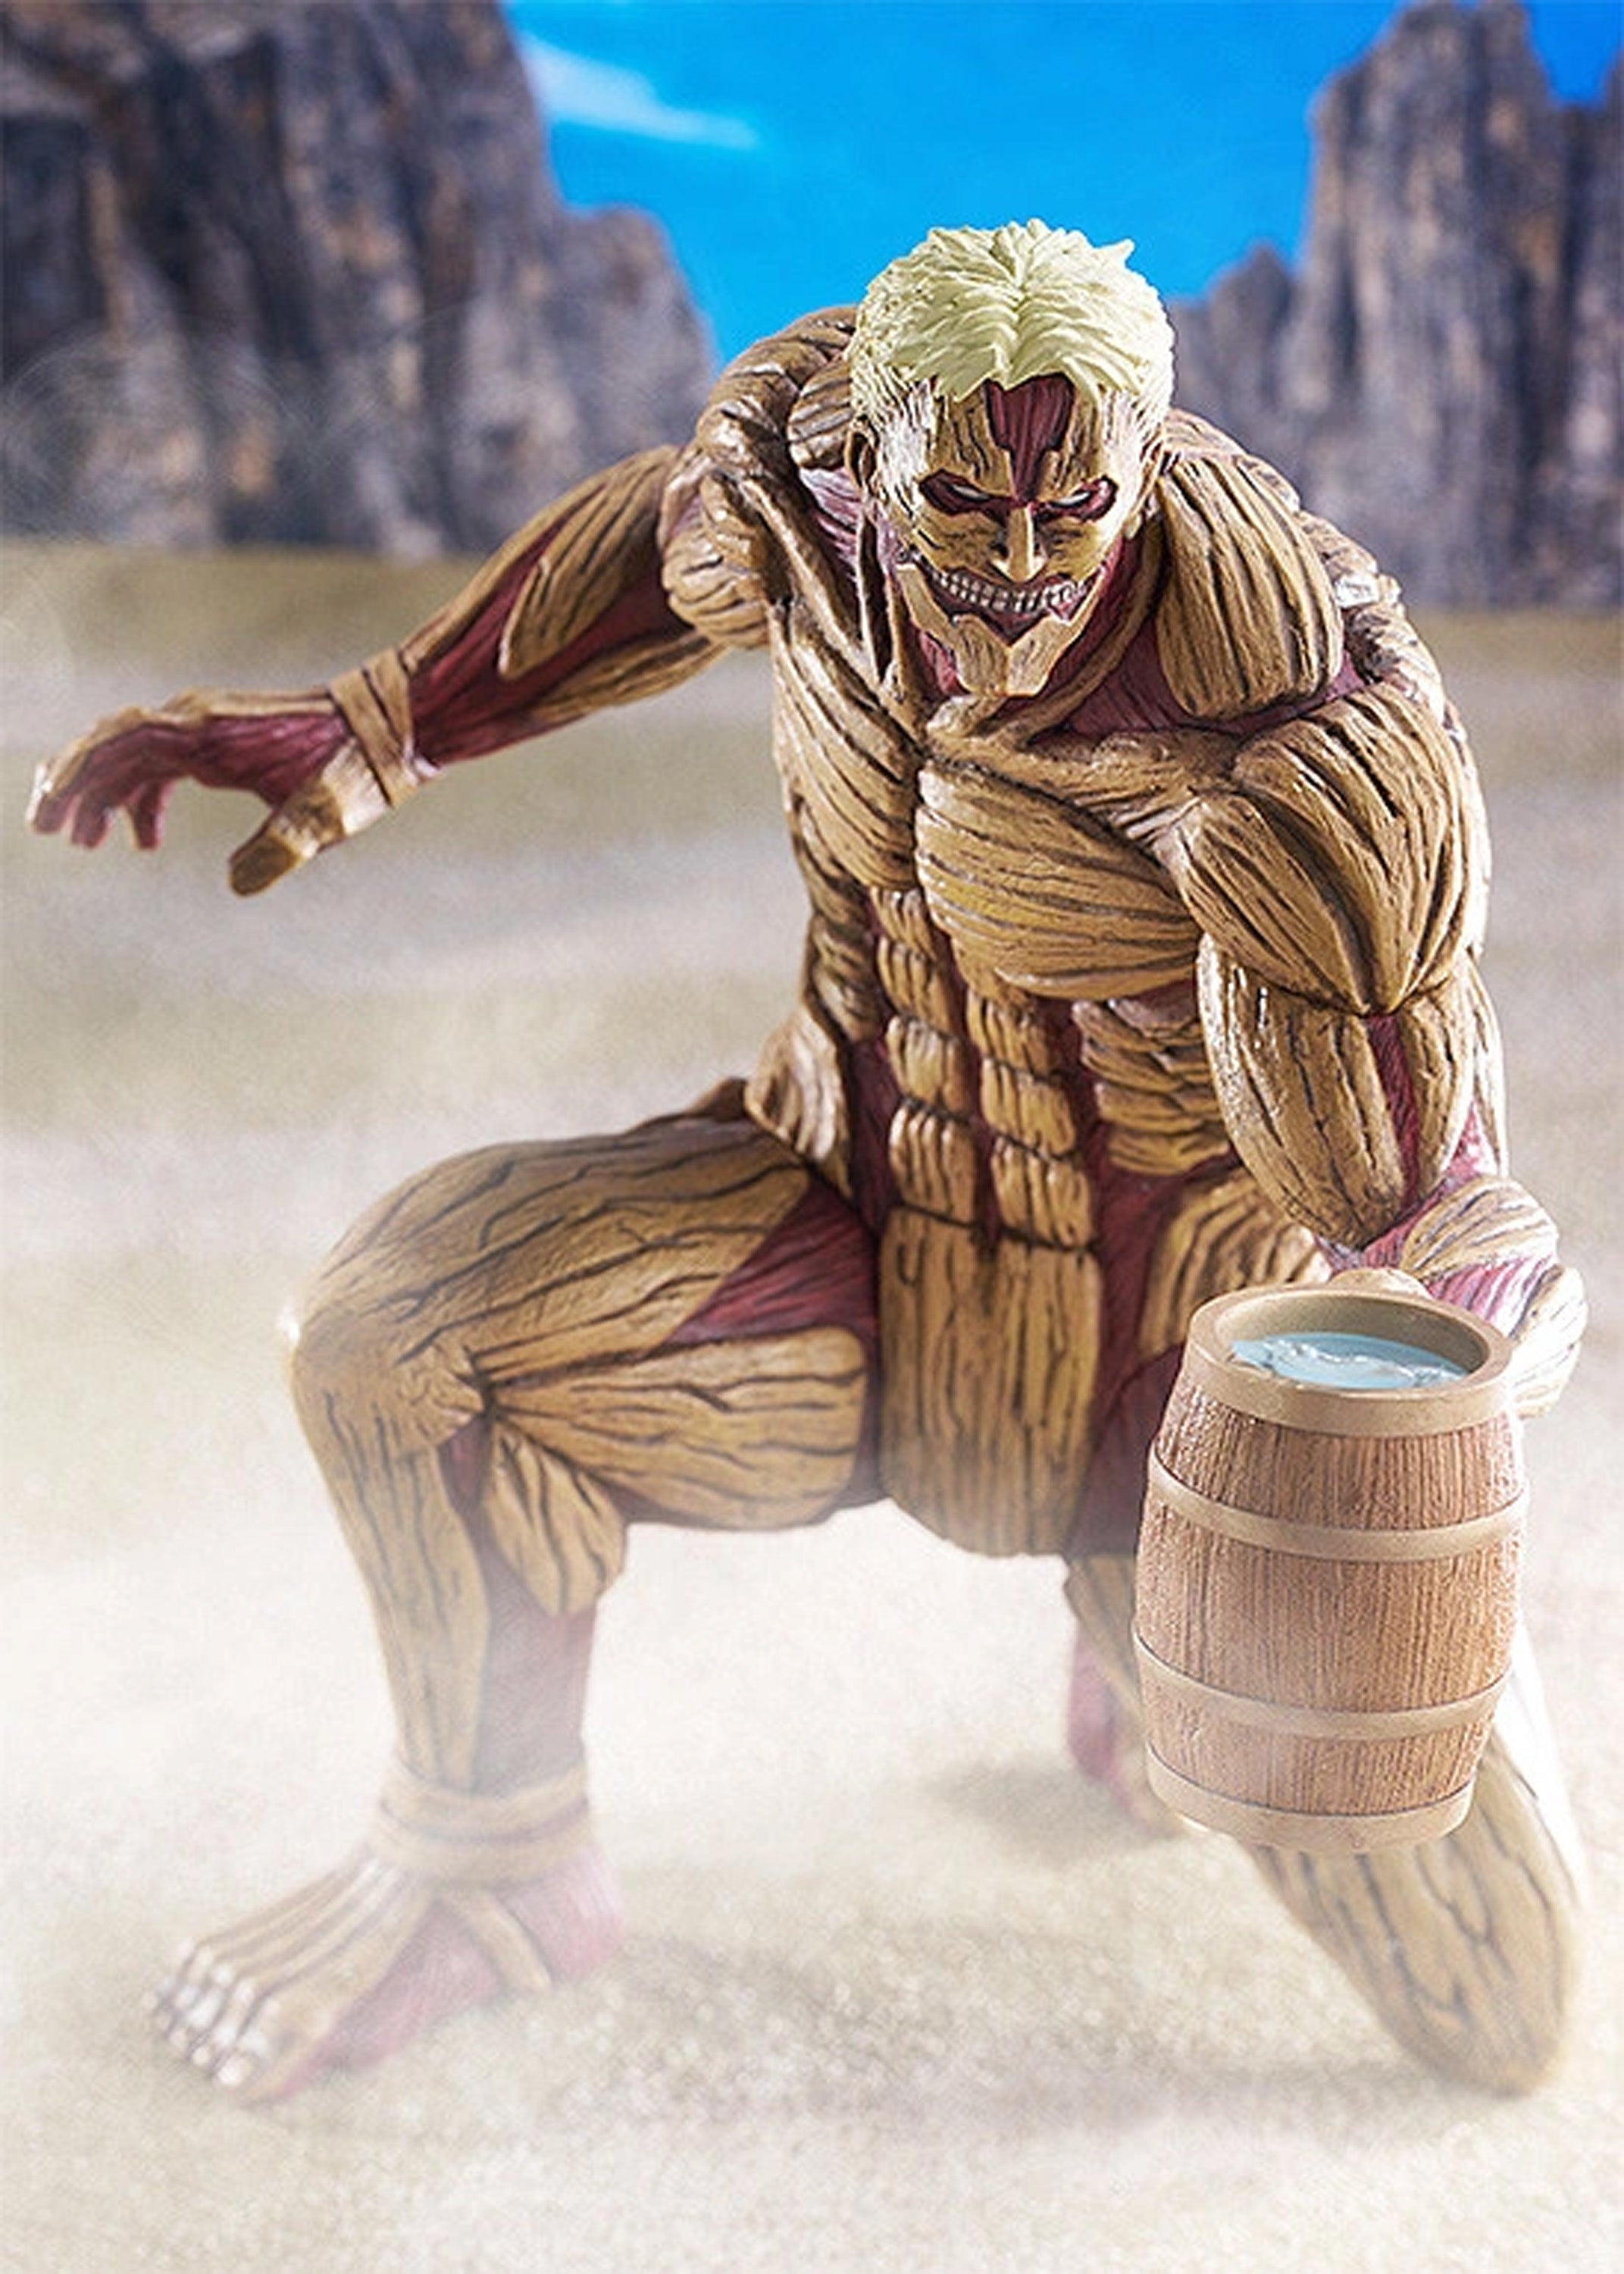 Good Smile Company - Pop Up Parade - Attack on Titan - Reiner Braun: Armored Titan (Worldwide After Party Ver.)